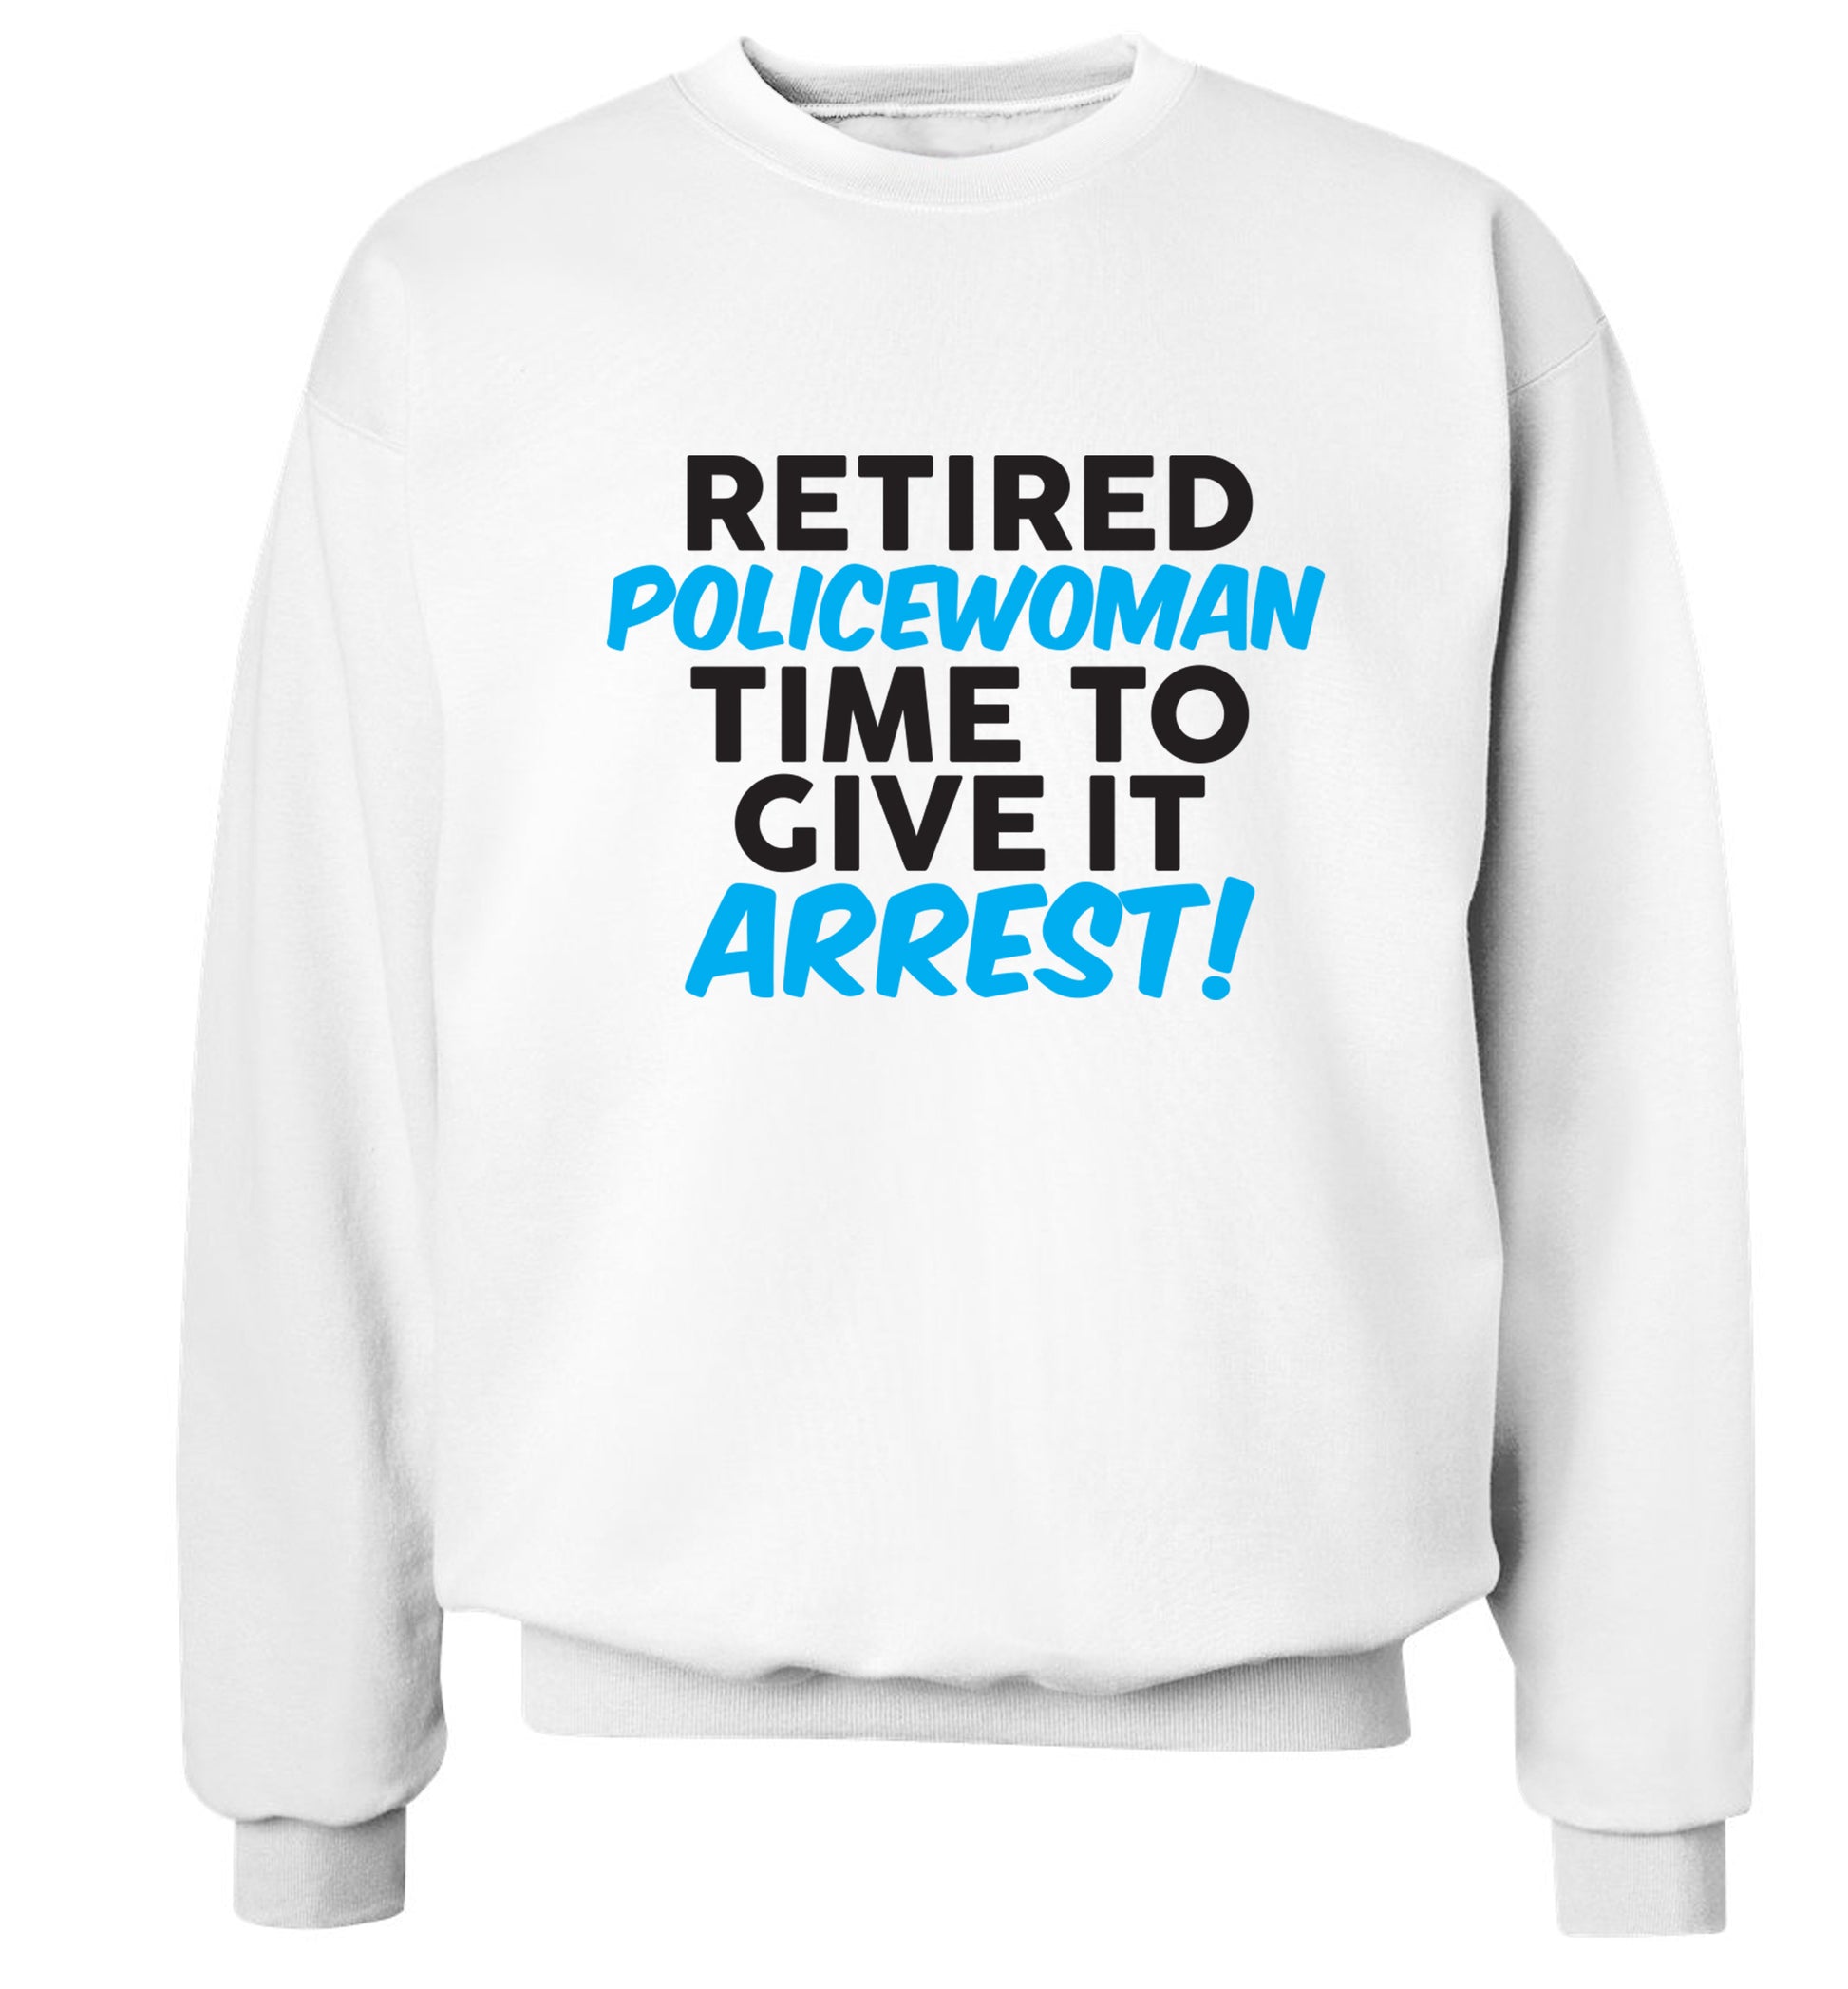 Retired policewoman time to give it arrest Adult's unisex white Sweater 2XL